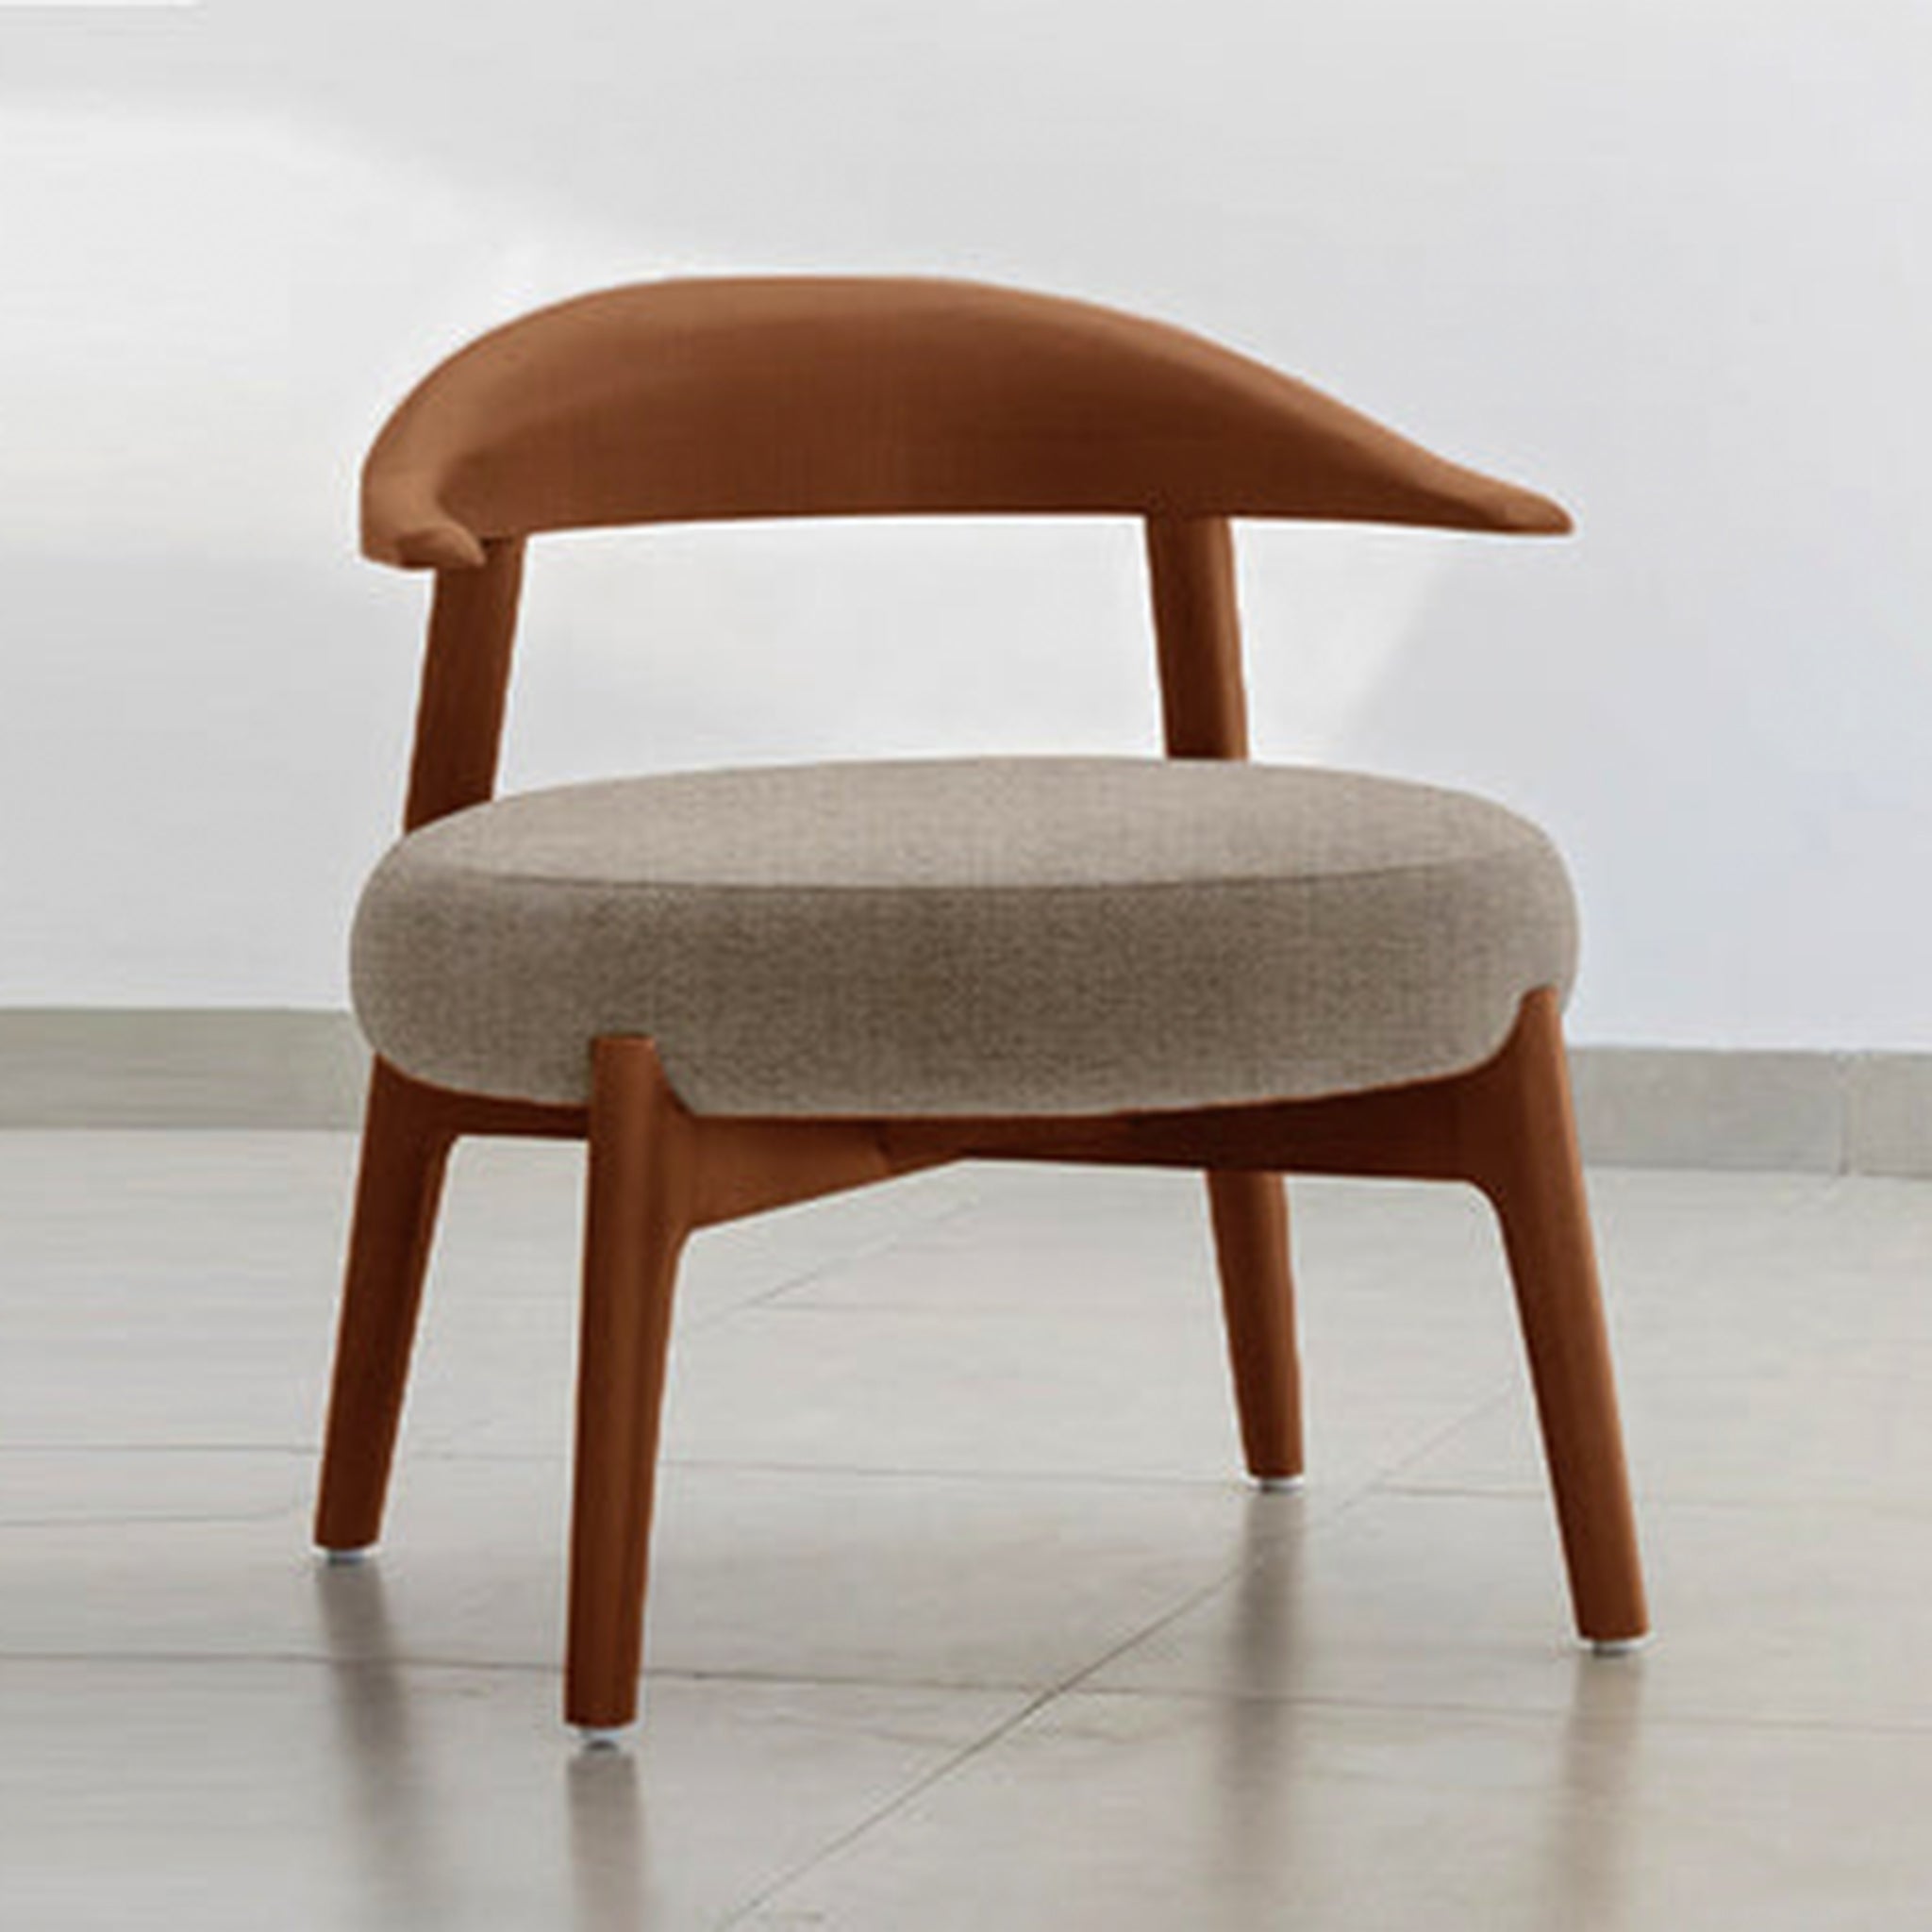 "The Hyde Accent Chair with sleek wooden curves and cozy fabric"